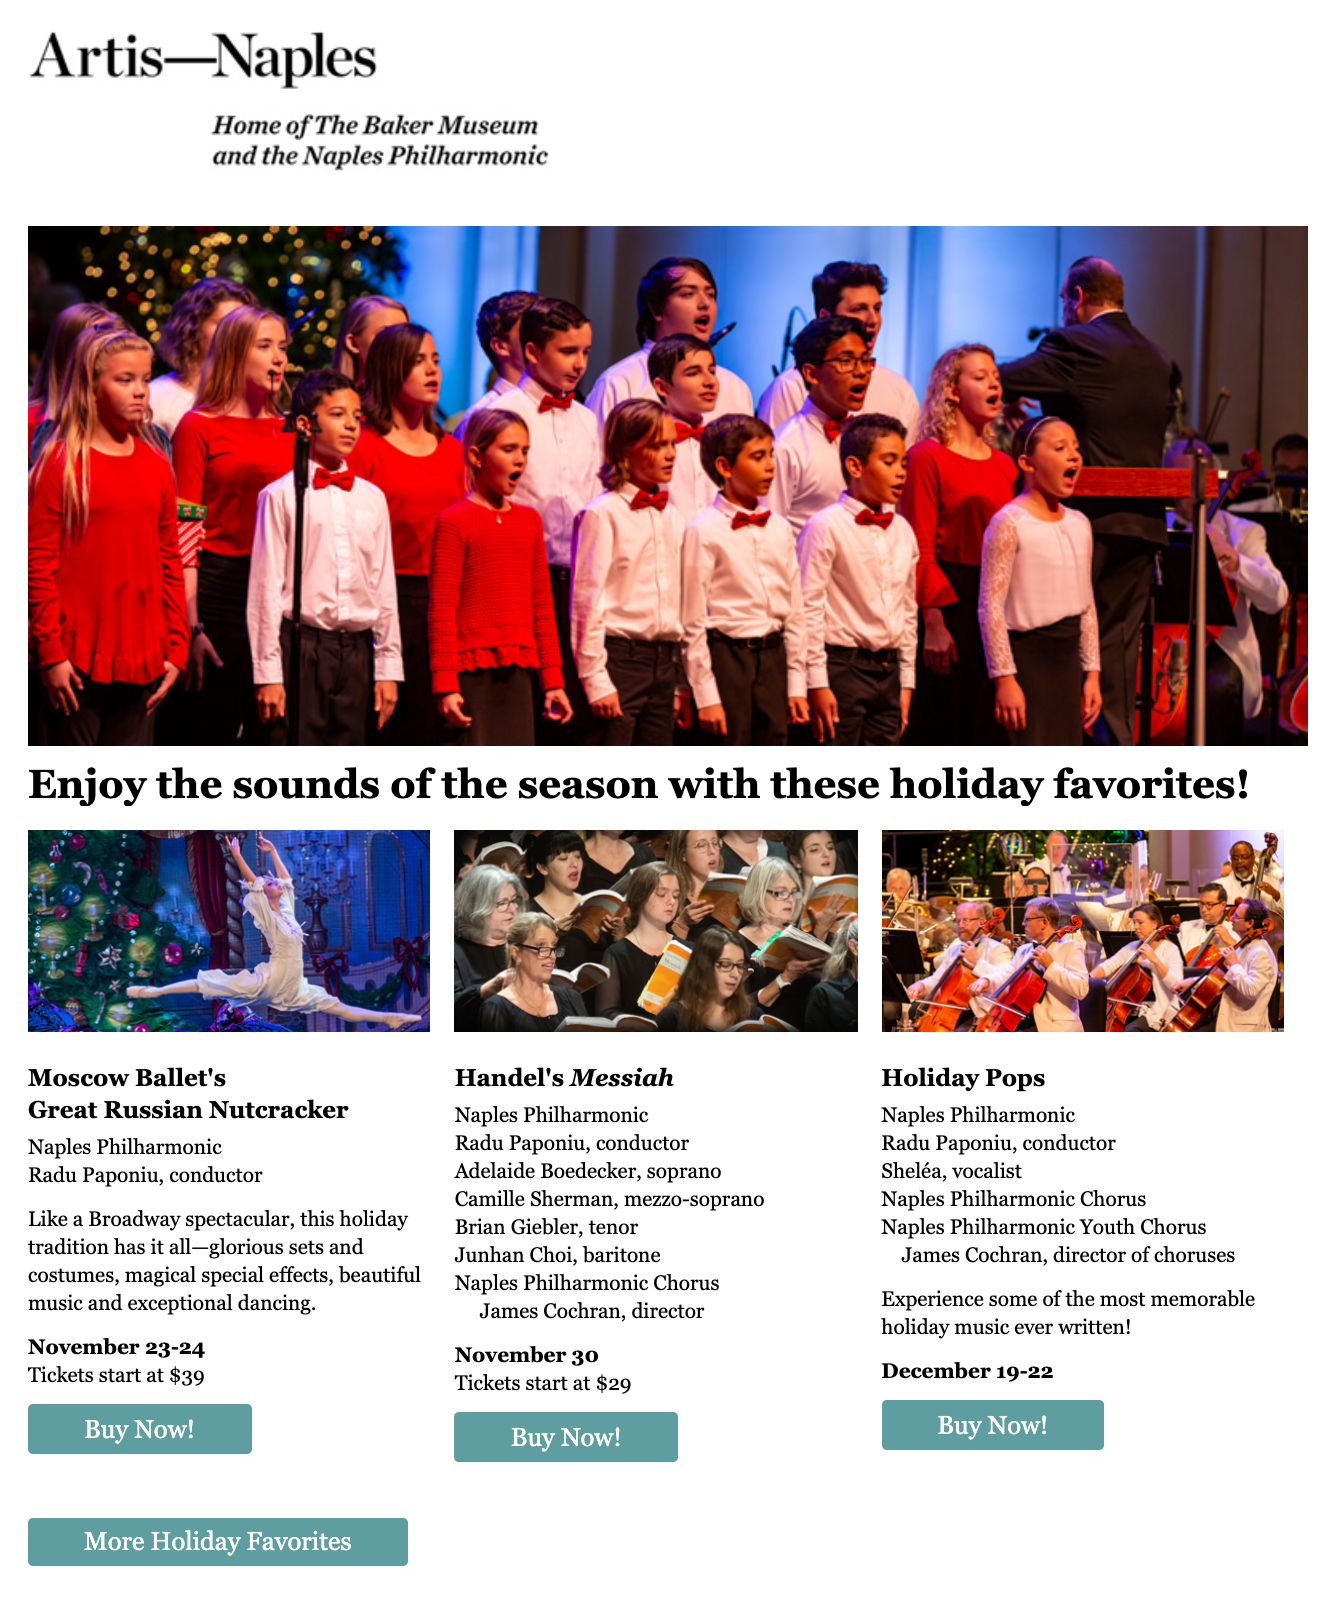 Example of Artis-Naples email featuring holiday photos of their performances